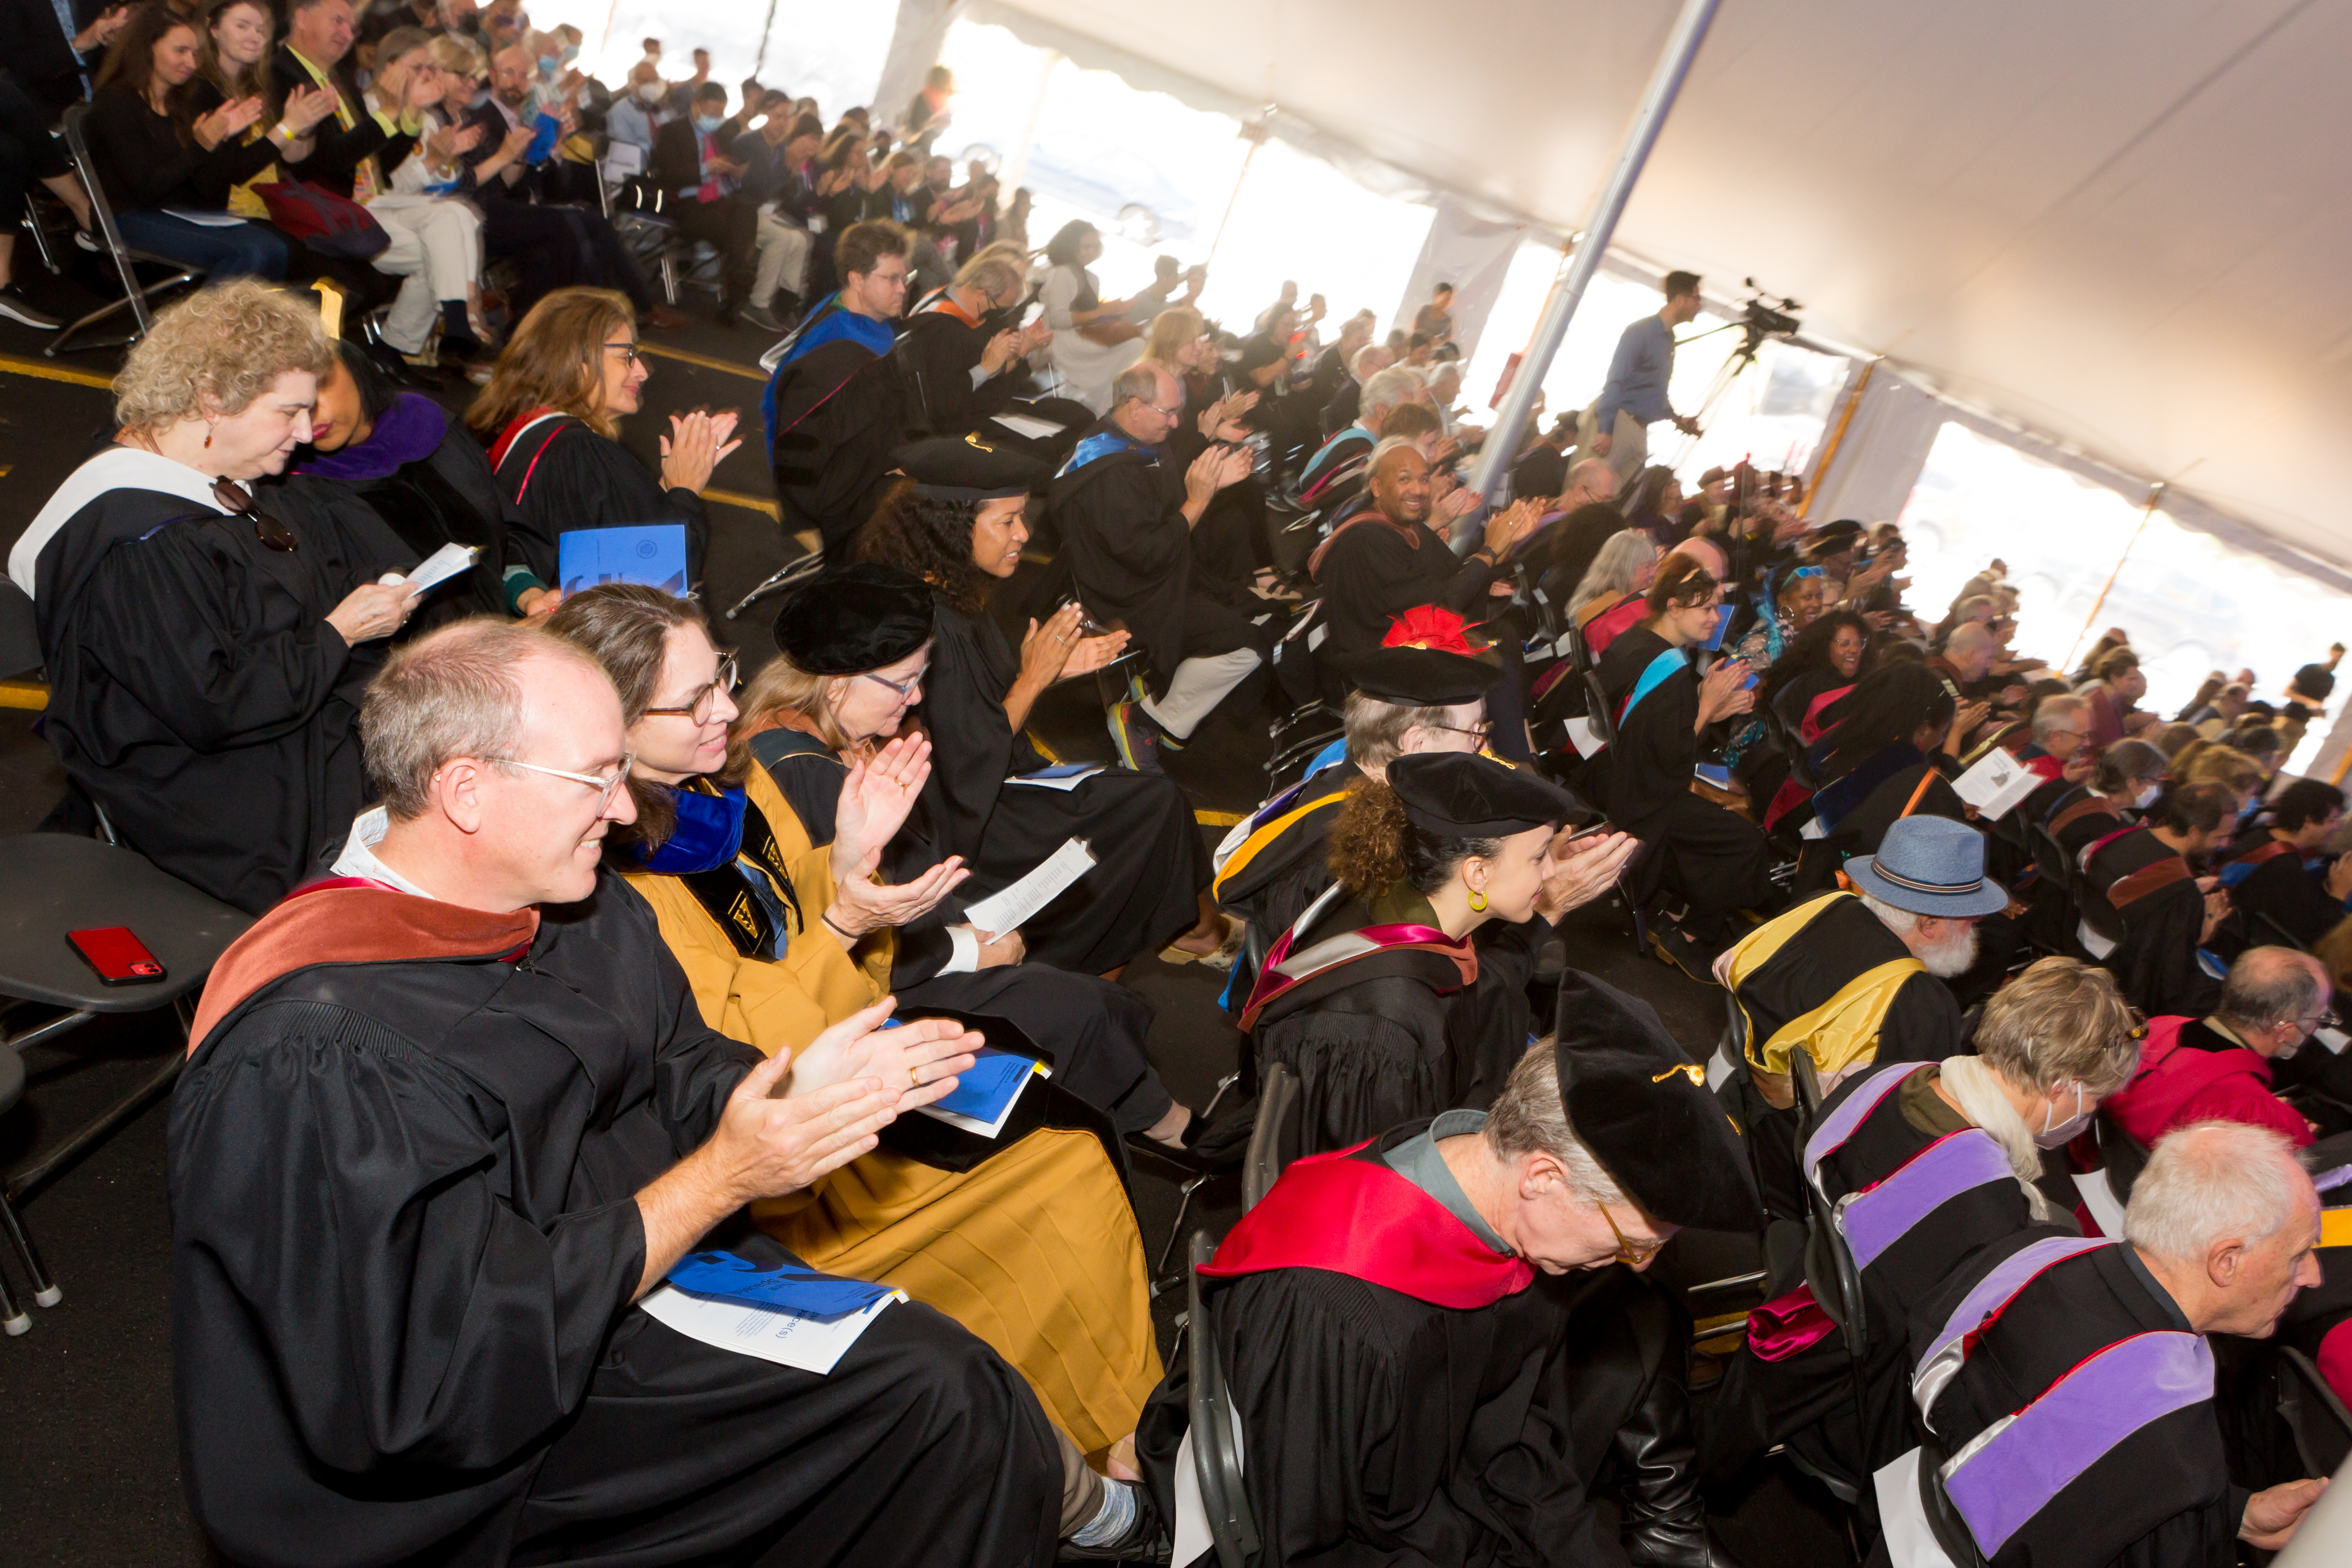 /A%20crowd%20of%20seated%20people%20dressed%20in%20masters%20and%20doctoral%20robes%20applaud.